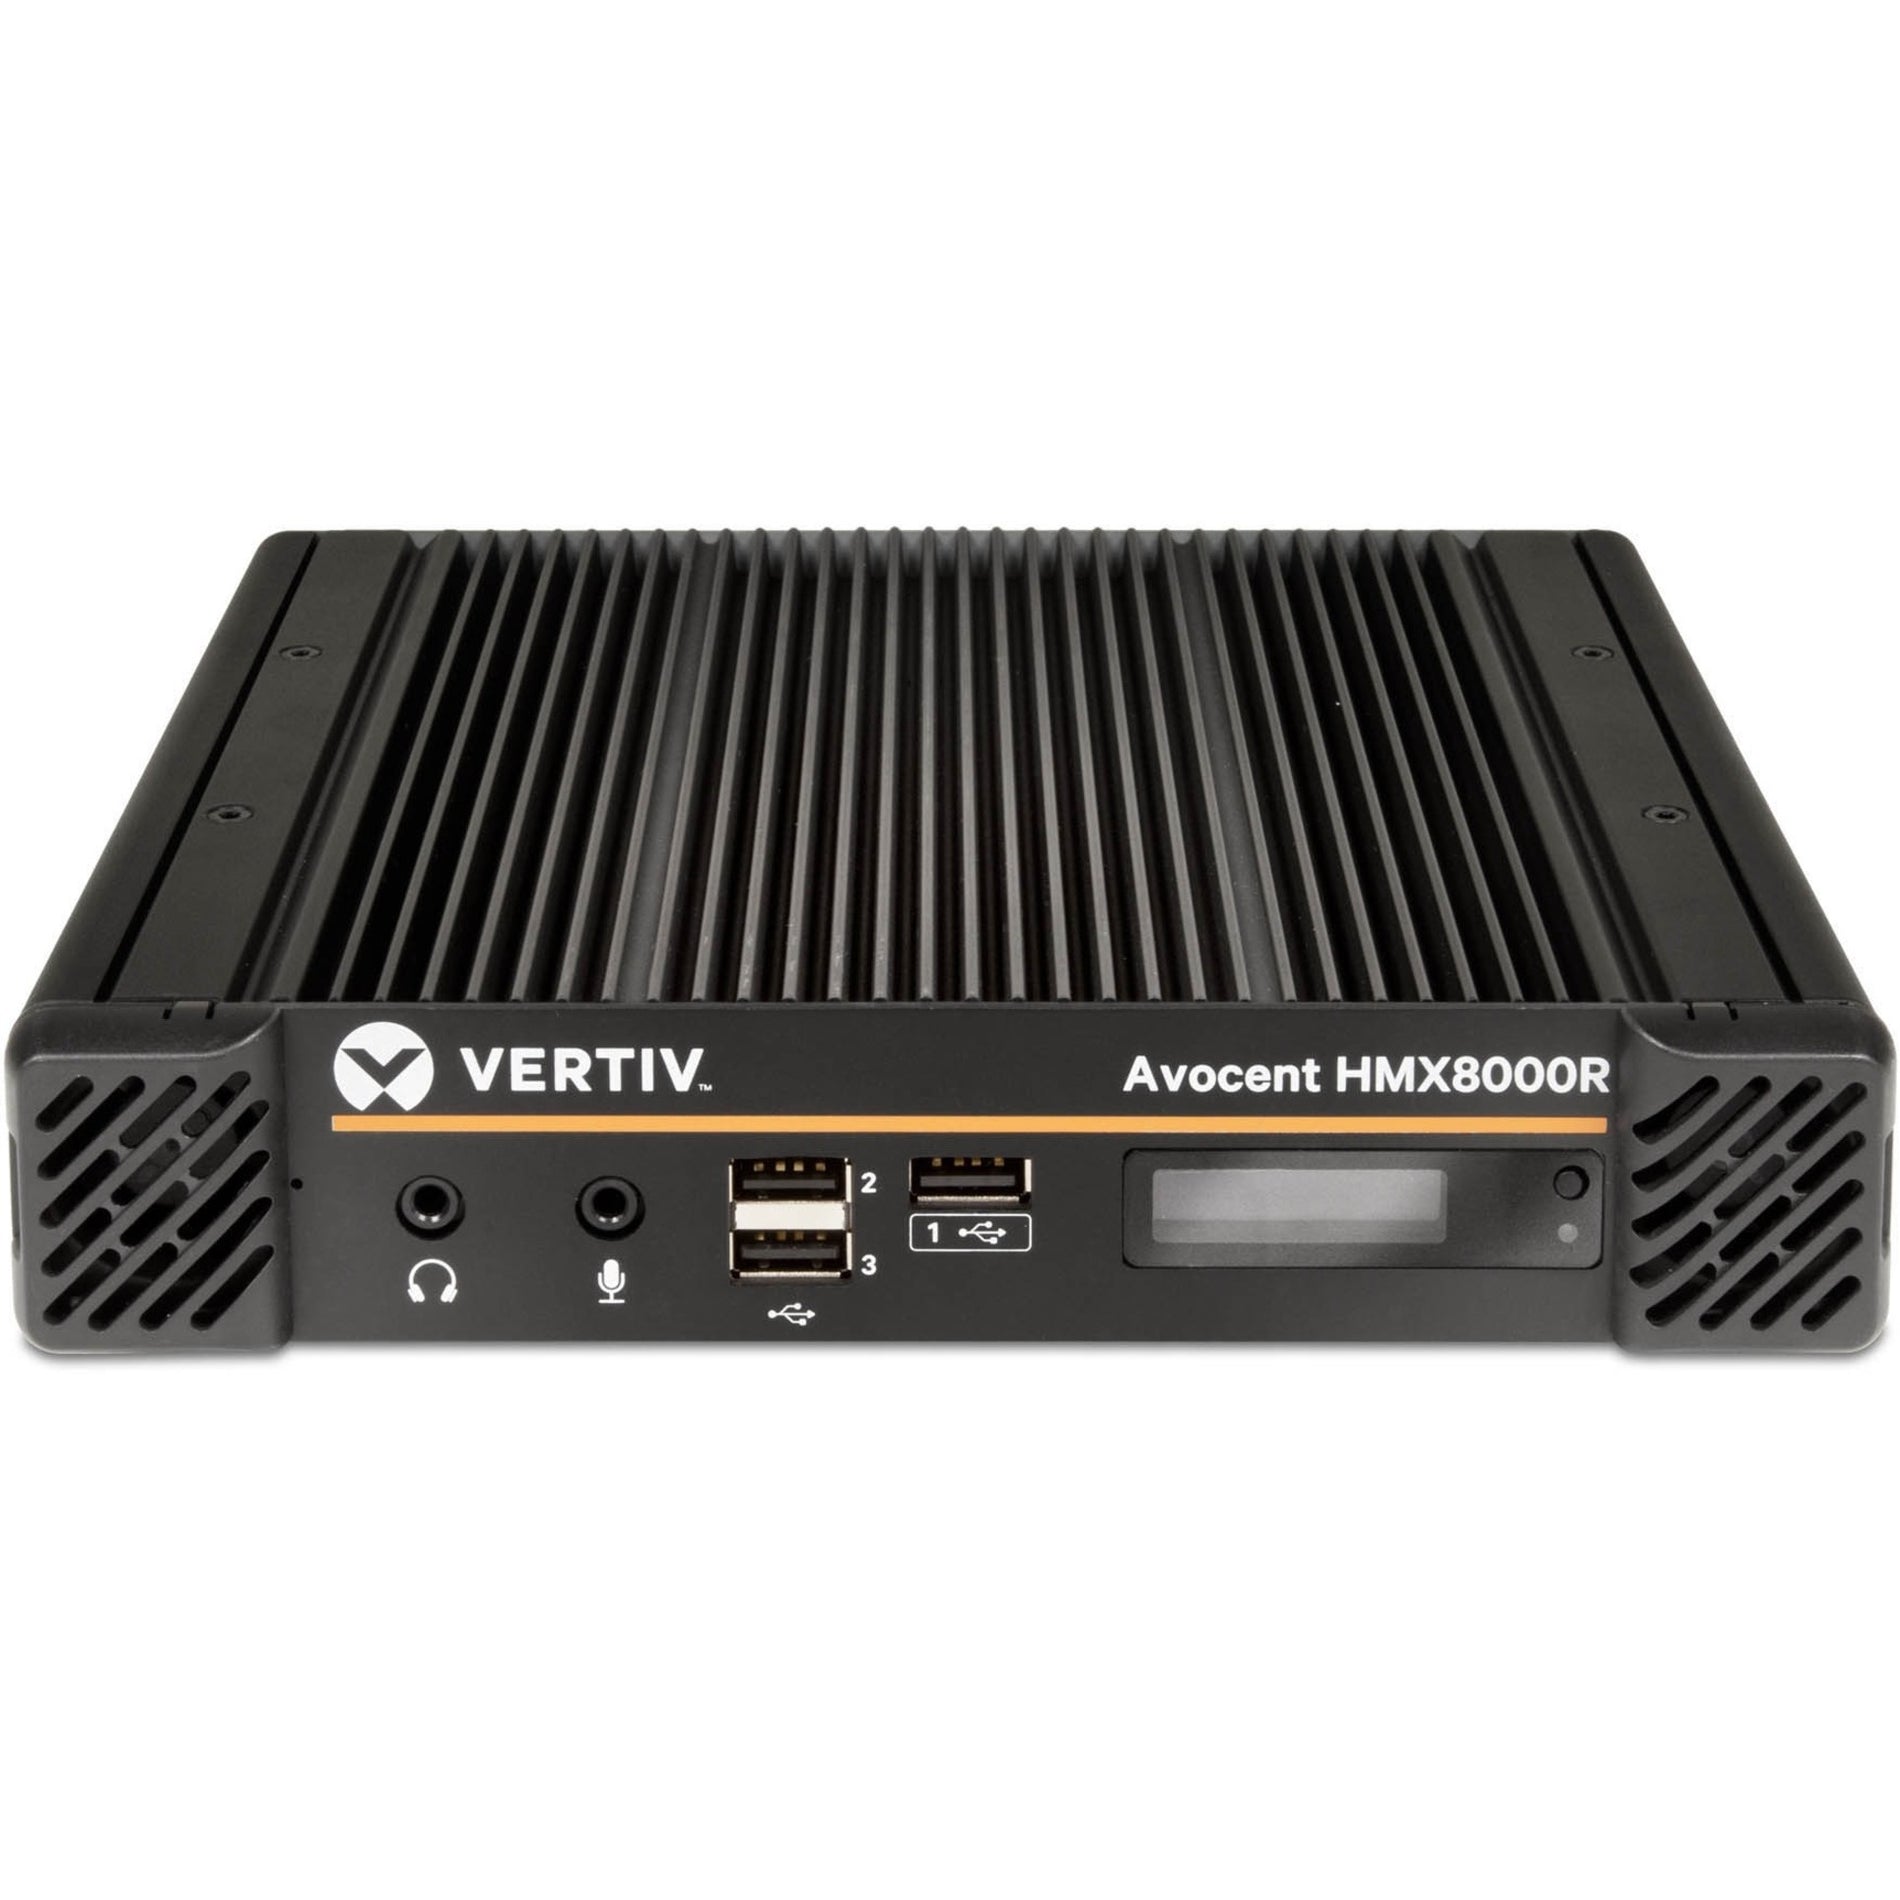 AVOCENT HMX8000R-400 HMX 8000 Receiver, KVM Console/Extender, 4K Video, 2 Year Warranty, TAA Compliant, PC/Mac/Linux Supported, USB, Microphone, Network (RJ-45), Digital Audio/Video